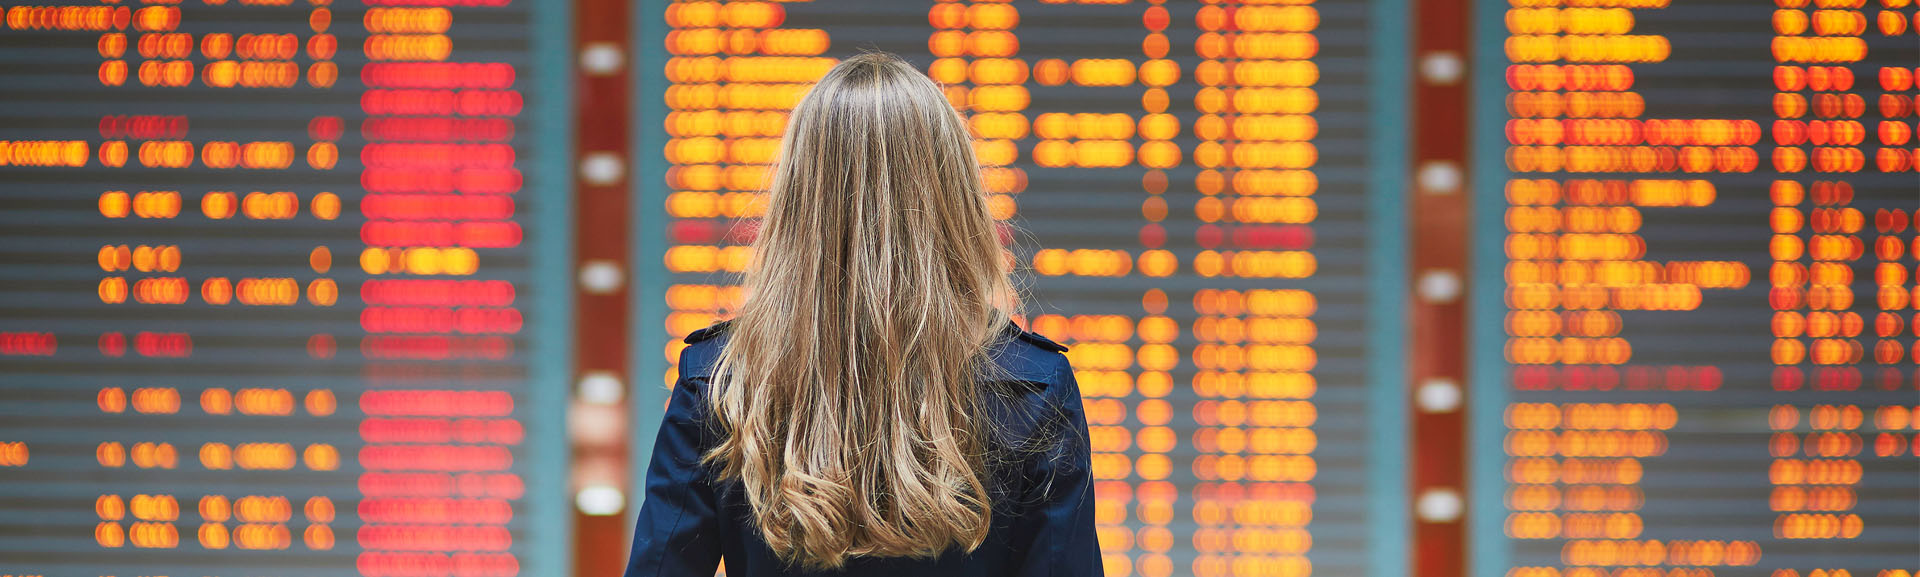 Woman looking at electronic departure board for canceled flight info